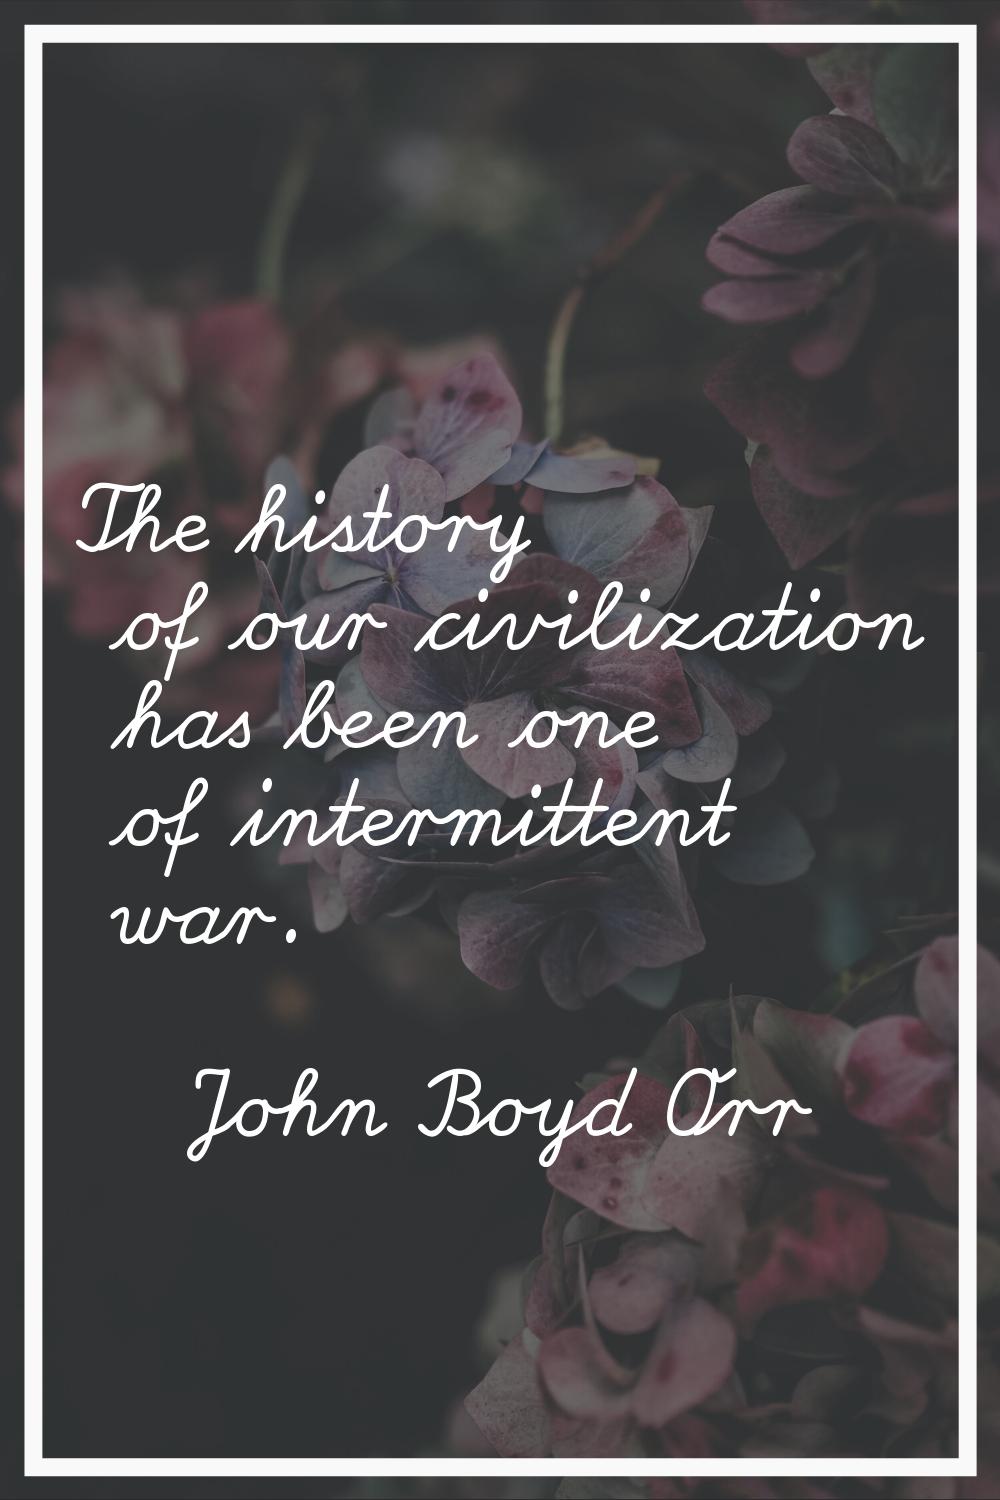 The history of our civilization has been one of intermittent war.